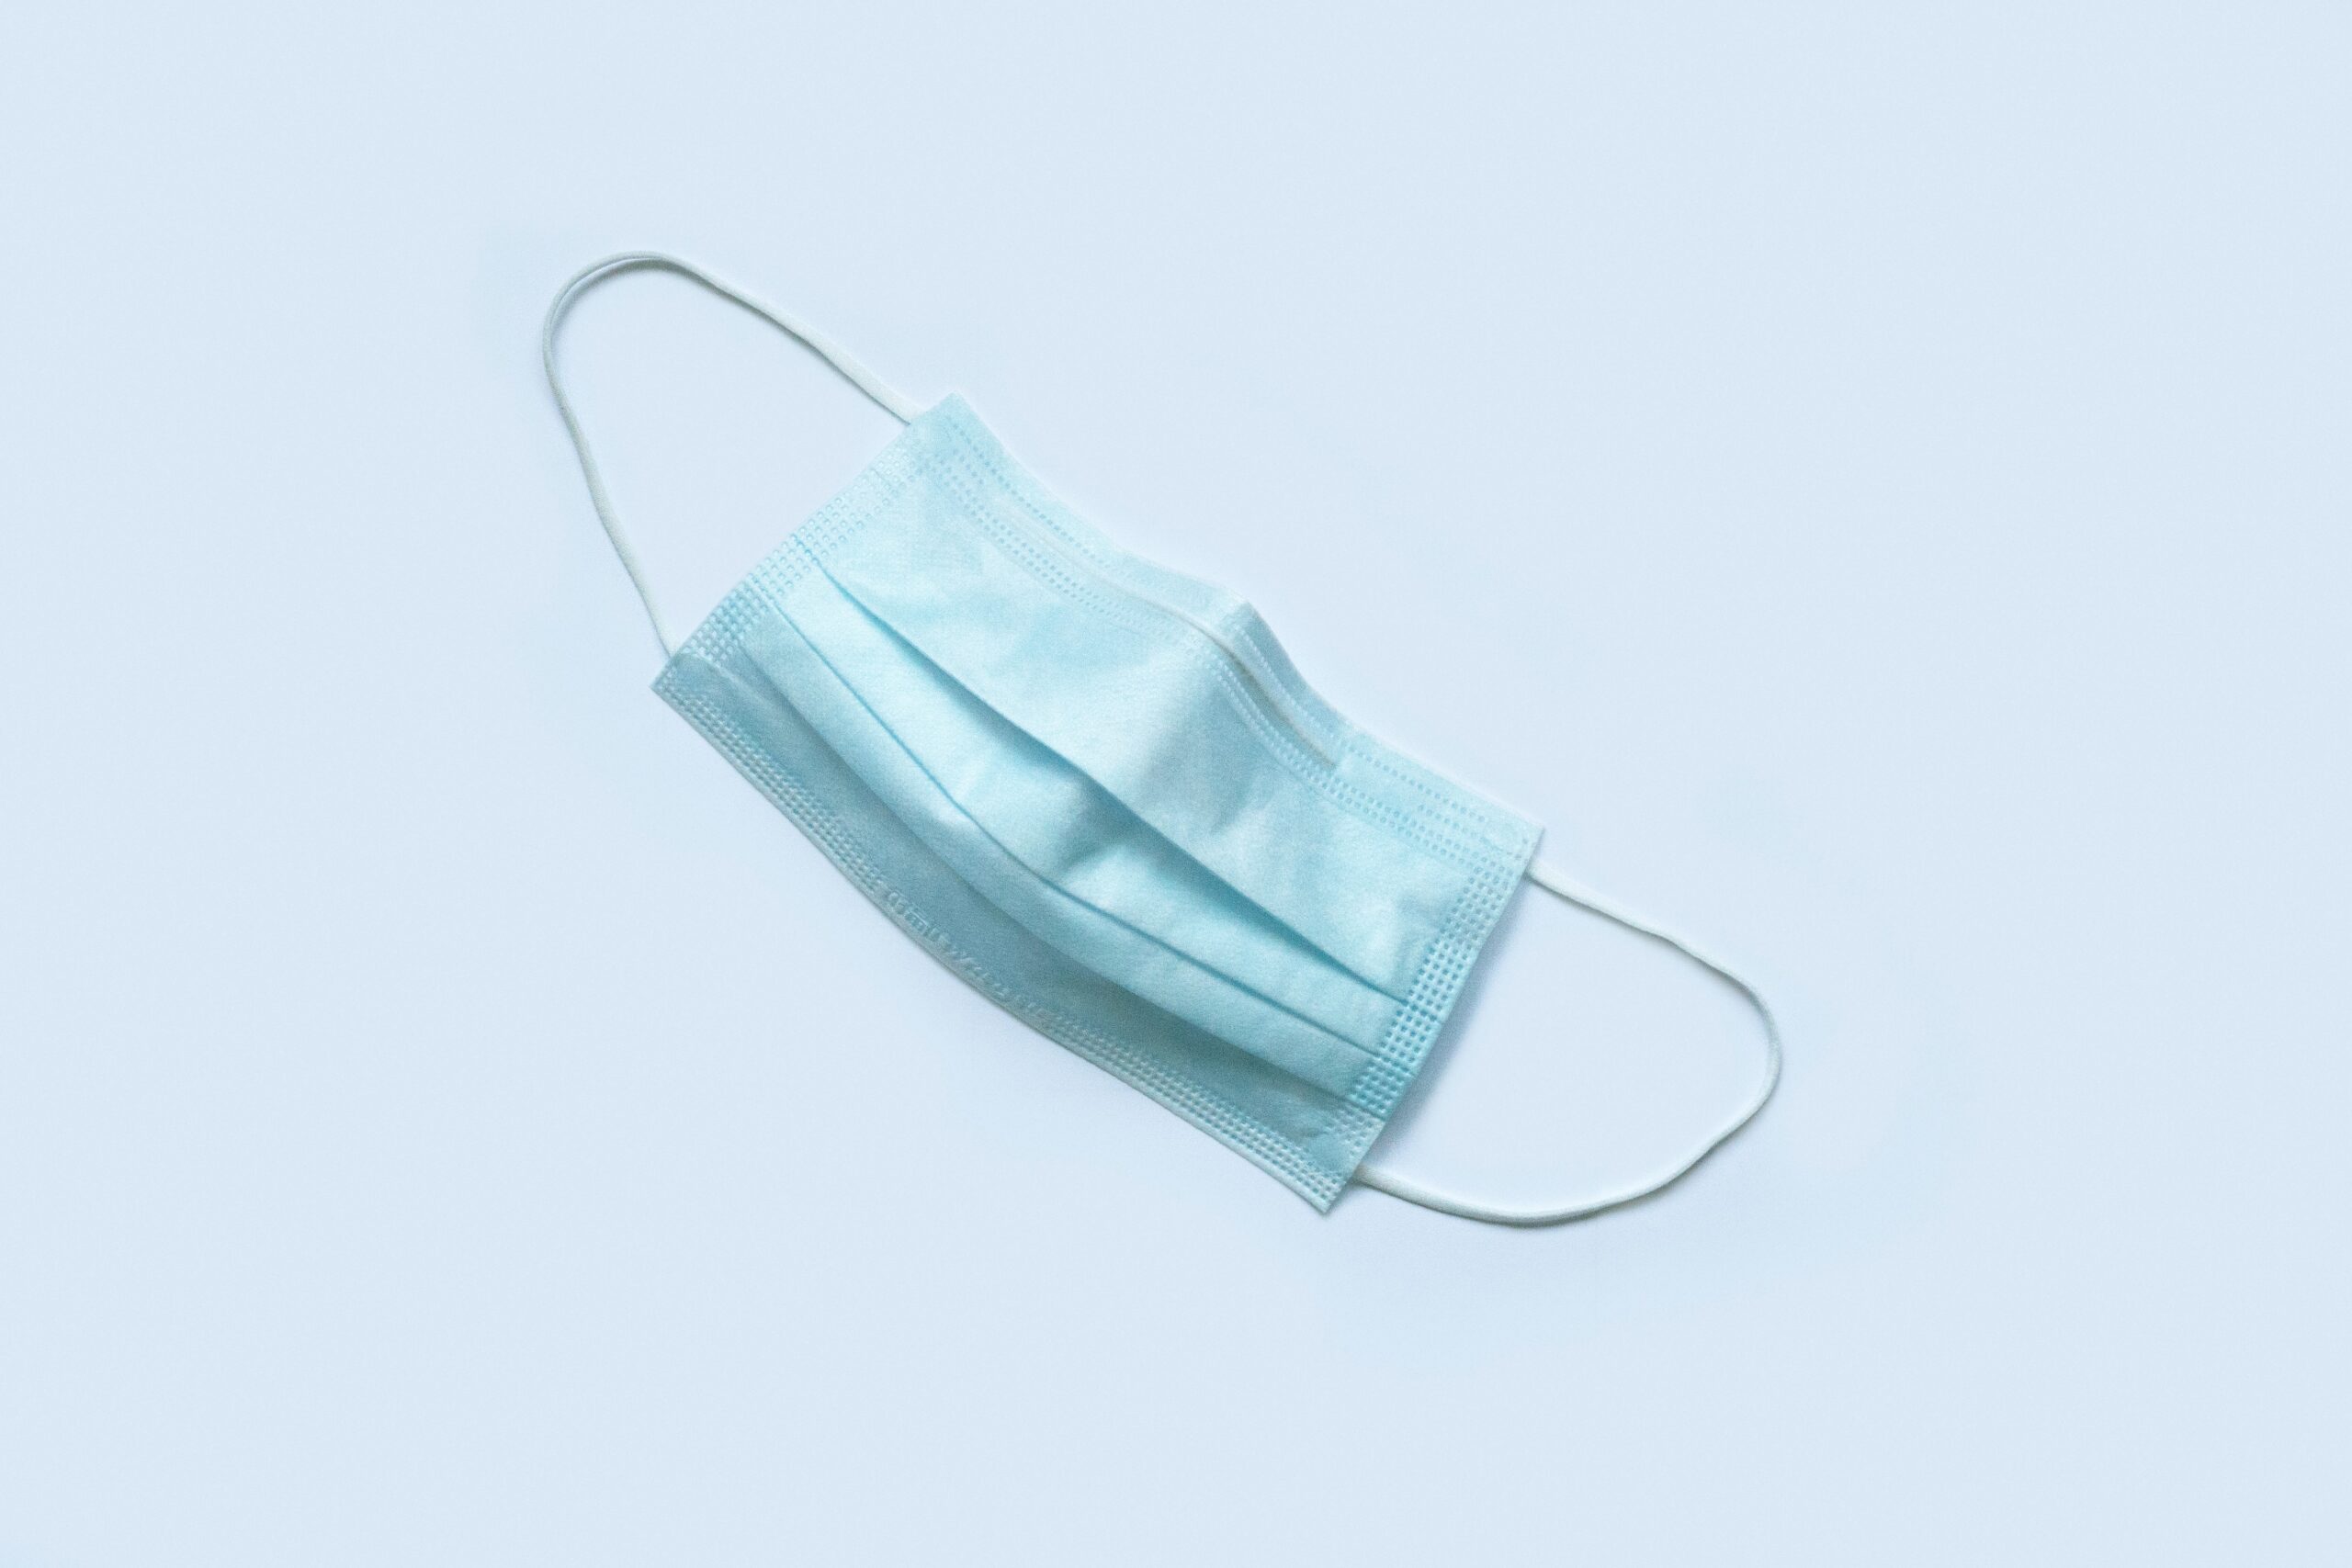 Photo of a blue surgical mask against a baby blue background.